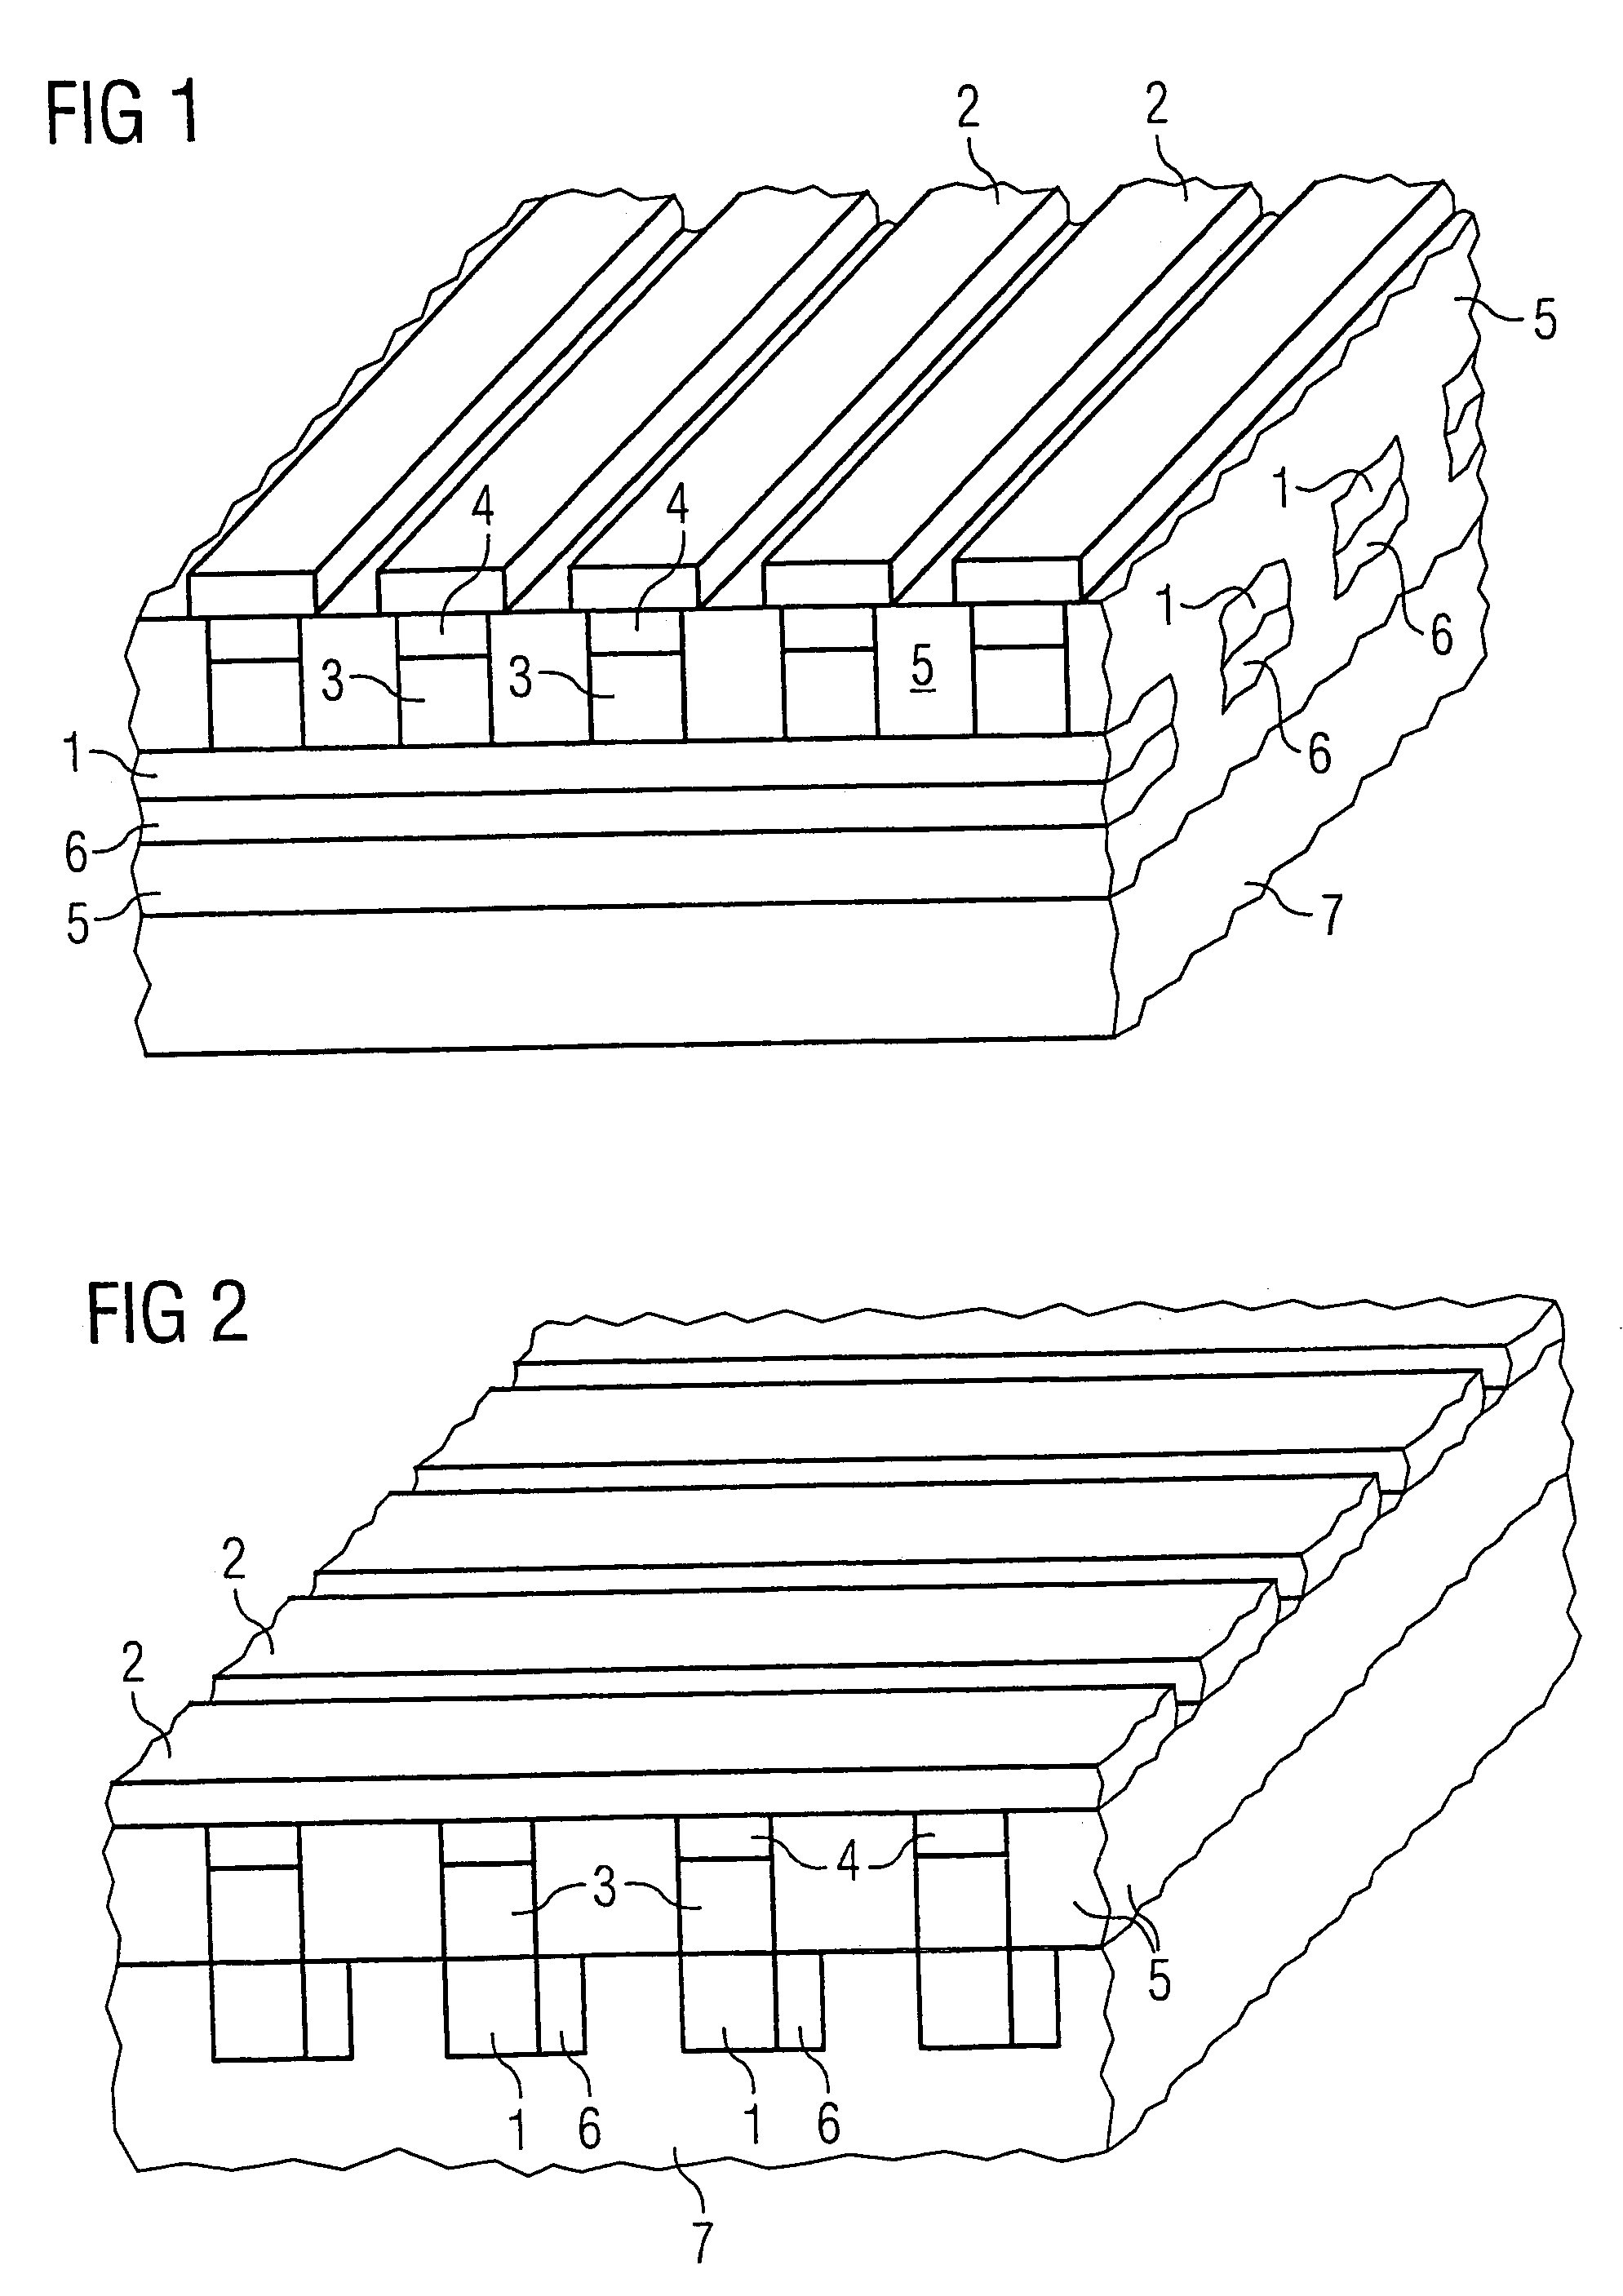 Semiconductor memory component in cross-point architecture